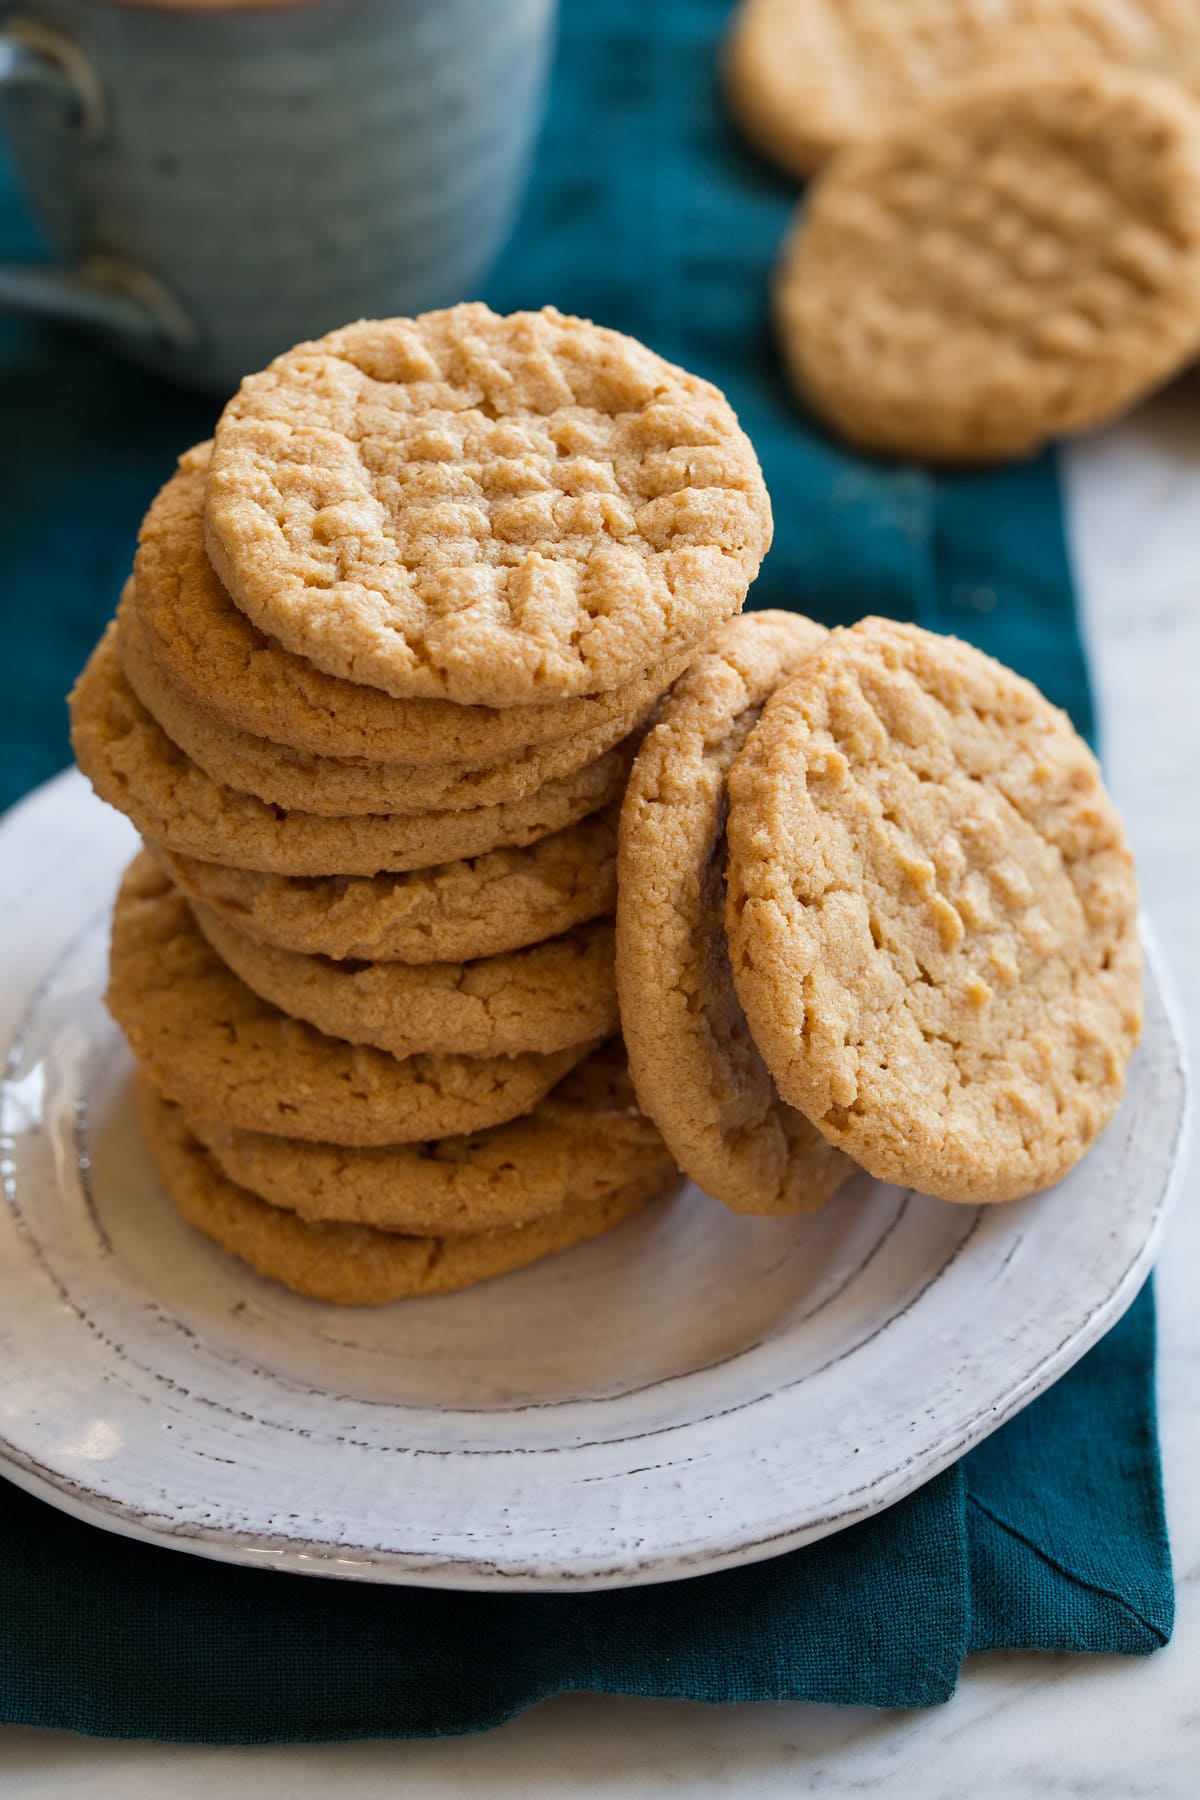 Three ingredient peanut butter cookies stacked on a white plate with a pile of cookies and mug in the background.